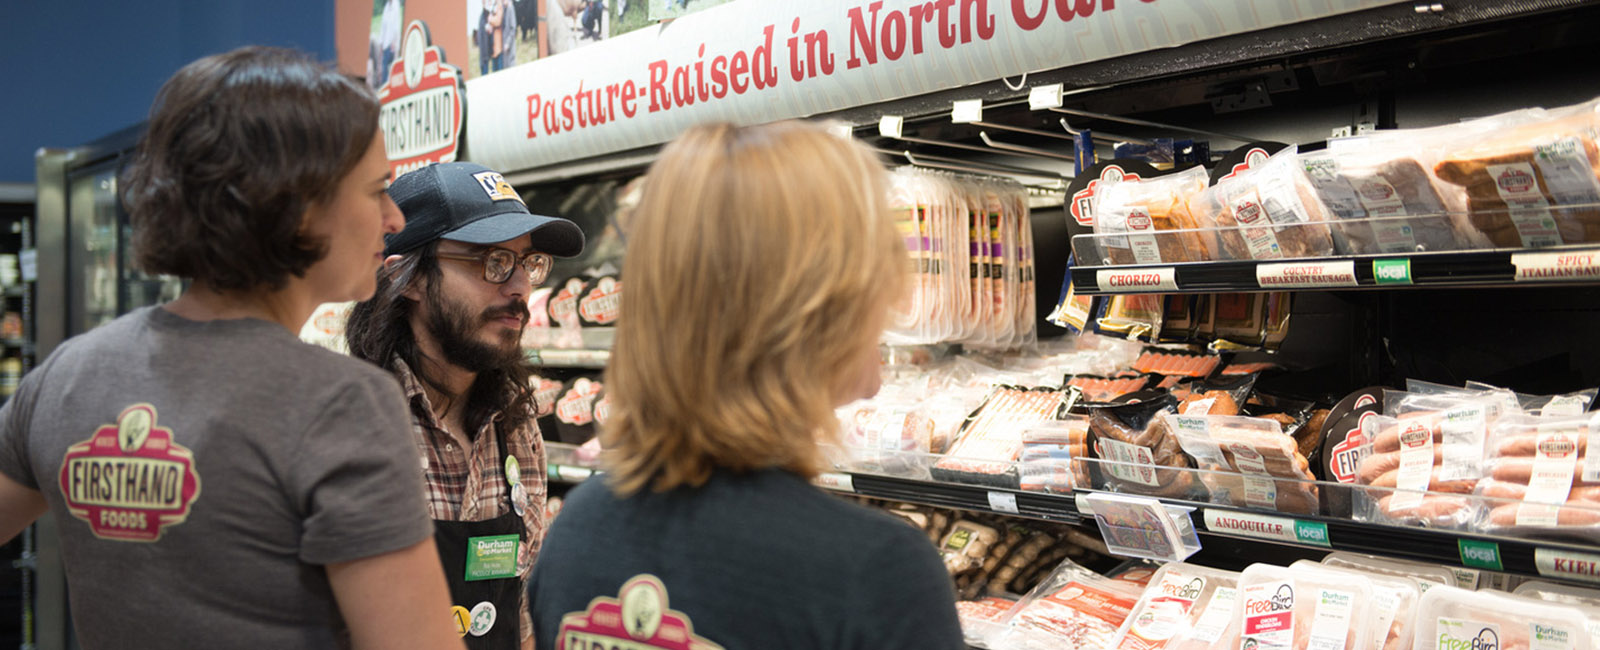 Firsthand Foods, a food hub, sells pasture-raised local meats to grocery stores.